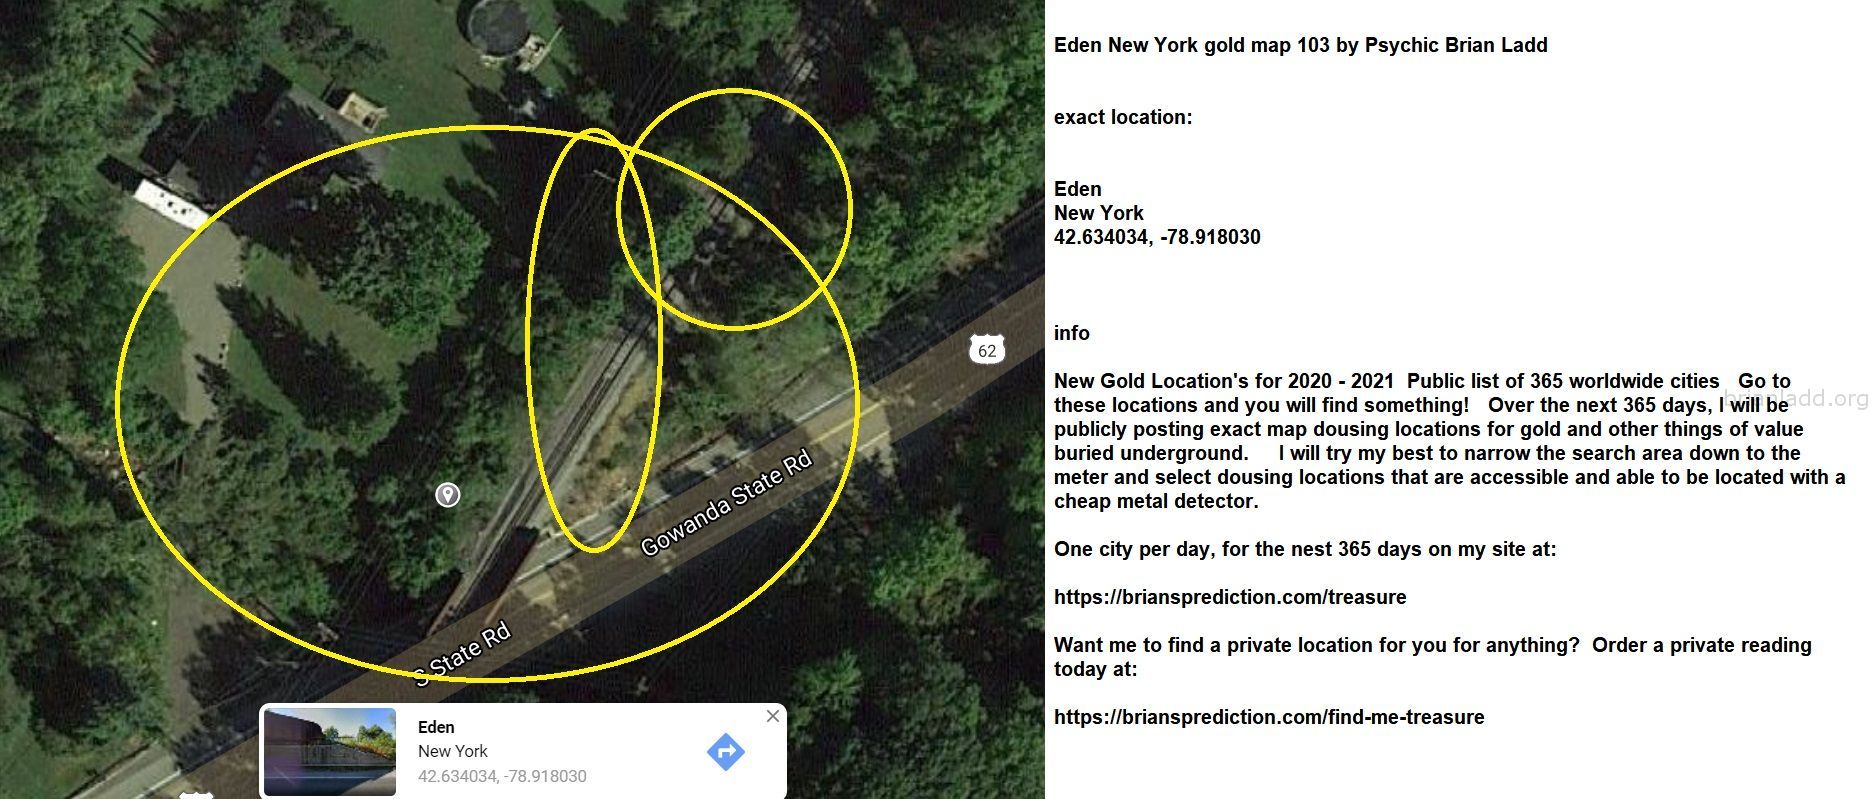 Eden New York Gold Map 103 By Psychic Brian Ladd - Eden New York Gold Map 103 By Psychic Brian Ladd  Exact Location:  Ed...
Eden New York Gold Map 103 By Psychic Brian Ladd  Exact Location:  Eden  New York  42.634034, -78.918030  Info  New Gold Location'S For 2020 - 2021  Public List Of 365 Worldwide Cities  Go To These Locations And You Will Find Something!  Over The Next 365 Days, I Will Be Publicly Posting Exact Map Dousing Locations For Gold And Other Things Of Value Buried Underground.  I Will Try My Best To Narrow The Search Area Down To The Meter And Select Dousing Locations That Are Accessible And Able To Be Located With A Cheap Metal Detector.  One City Per Day, For The Nest 365 Days On My Site At:   https://briansprediction.com/Treasure  Want Me To Find A Private Location For You For Anything?  Order A Private Reading Today At:   https://briansprediction.com/Find-Me-Treasure
